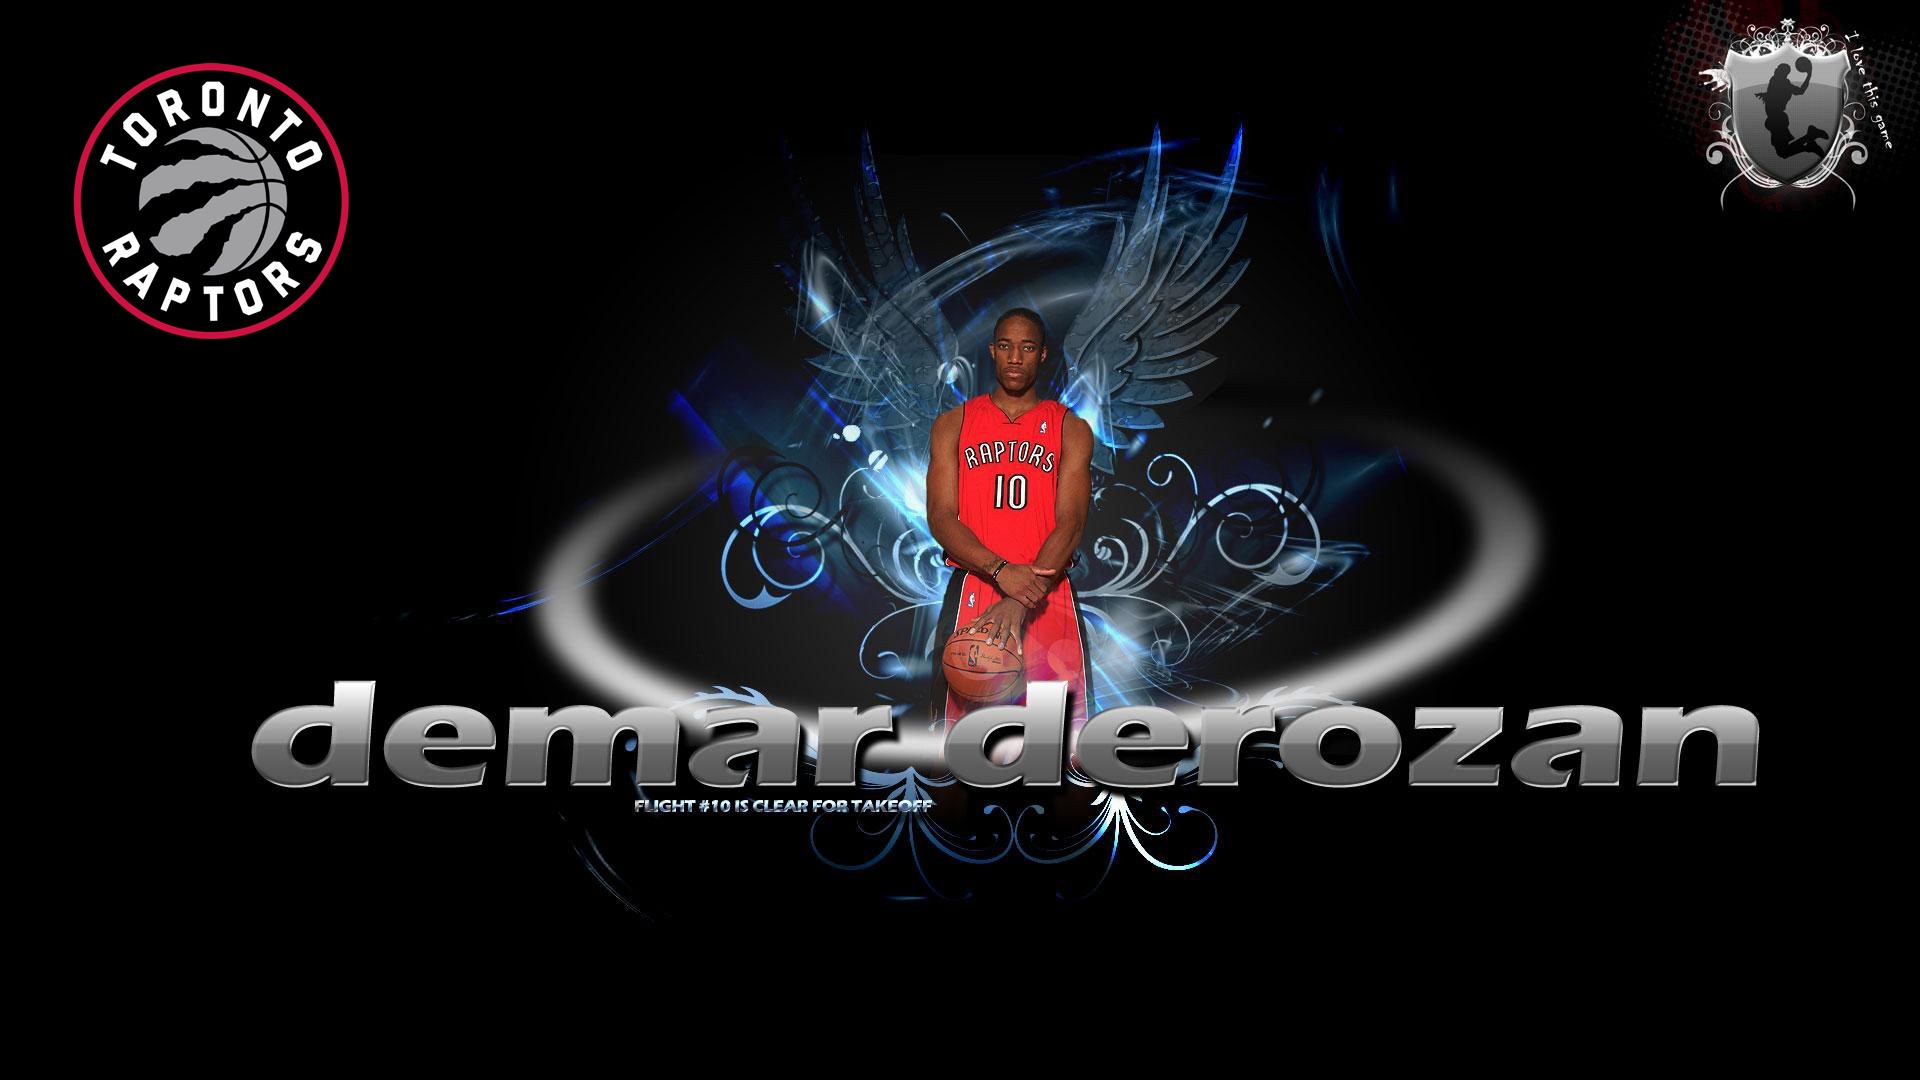 HD Desktop Wallpaper DeMar DeRozan with image dimensions 1920x1080 pixel. You can make this wallpaper for your Desktop Computer Backgrounds, Windows or Mac Screensavers, iPhone Lock screen, Tablet or Android and another Mobile Phone device